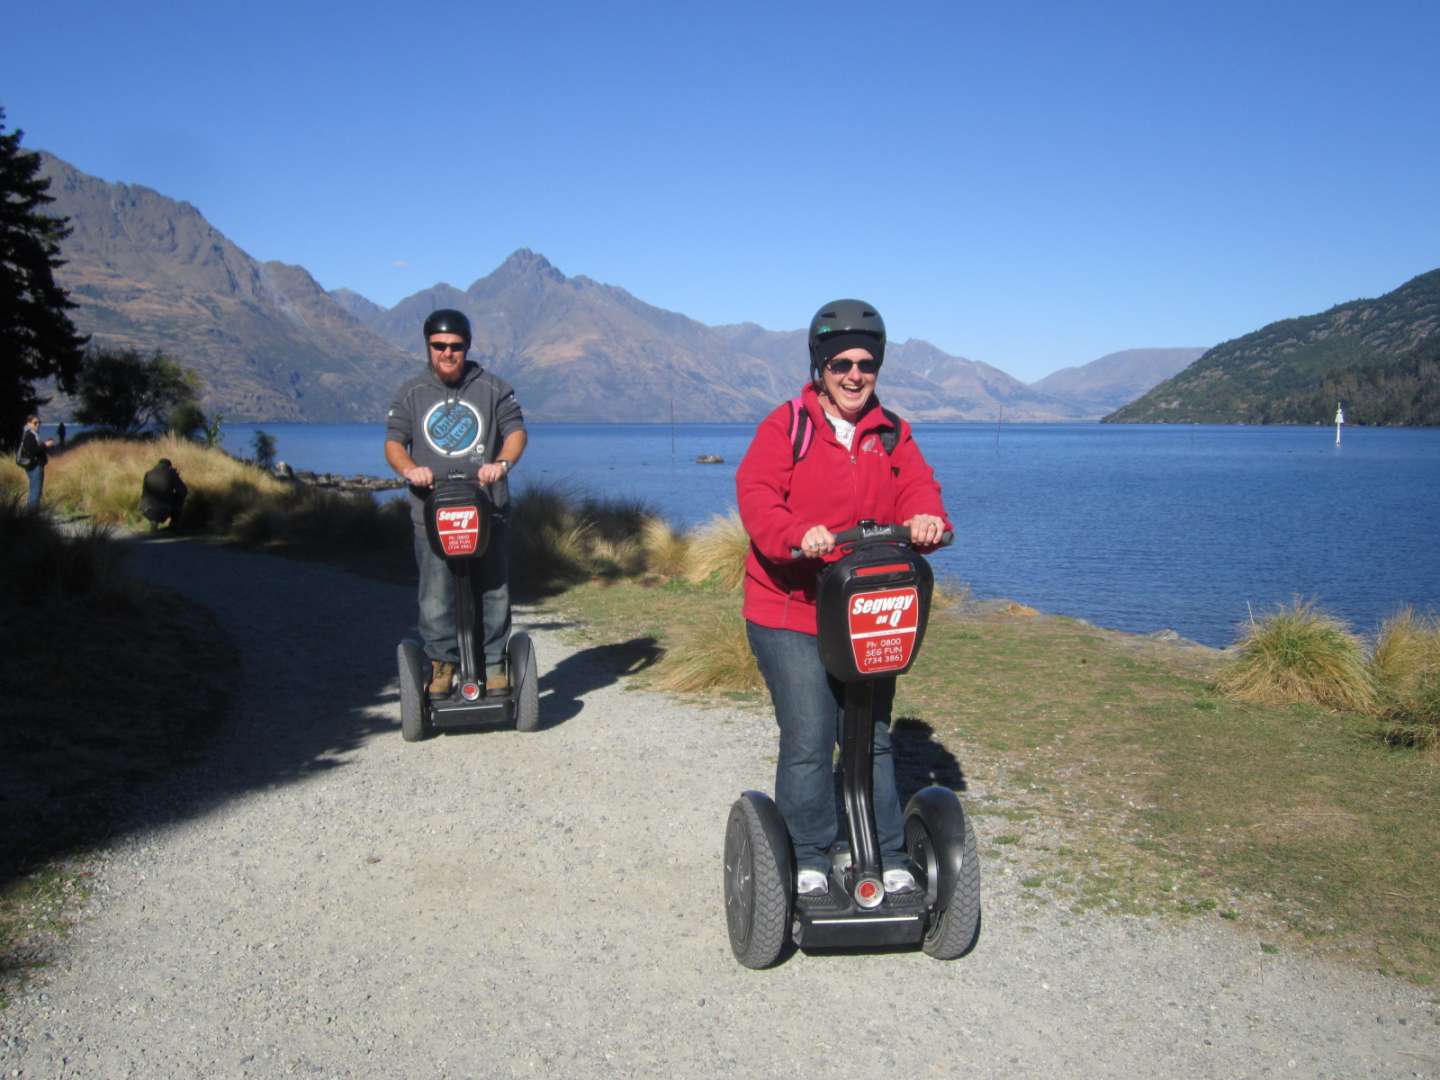 Segway is a Great Activity for All in Queenstown